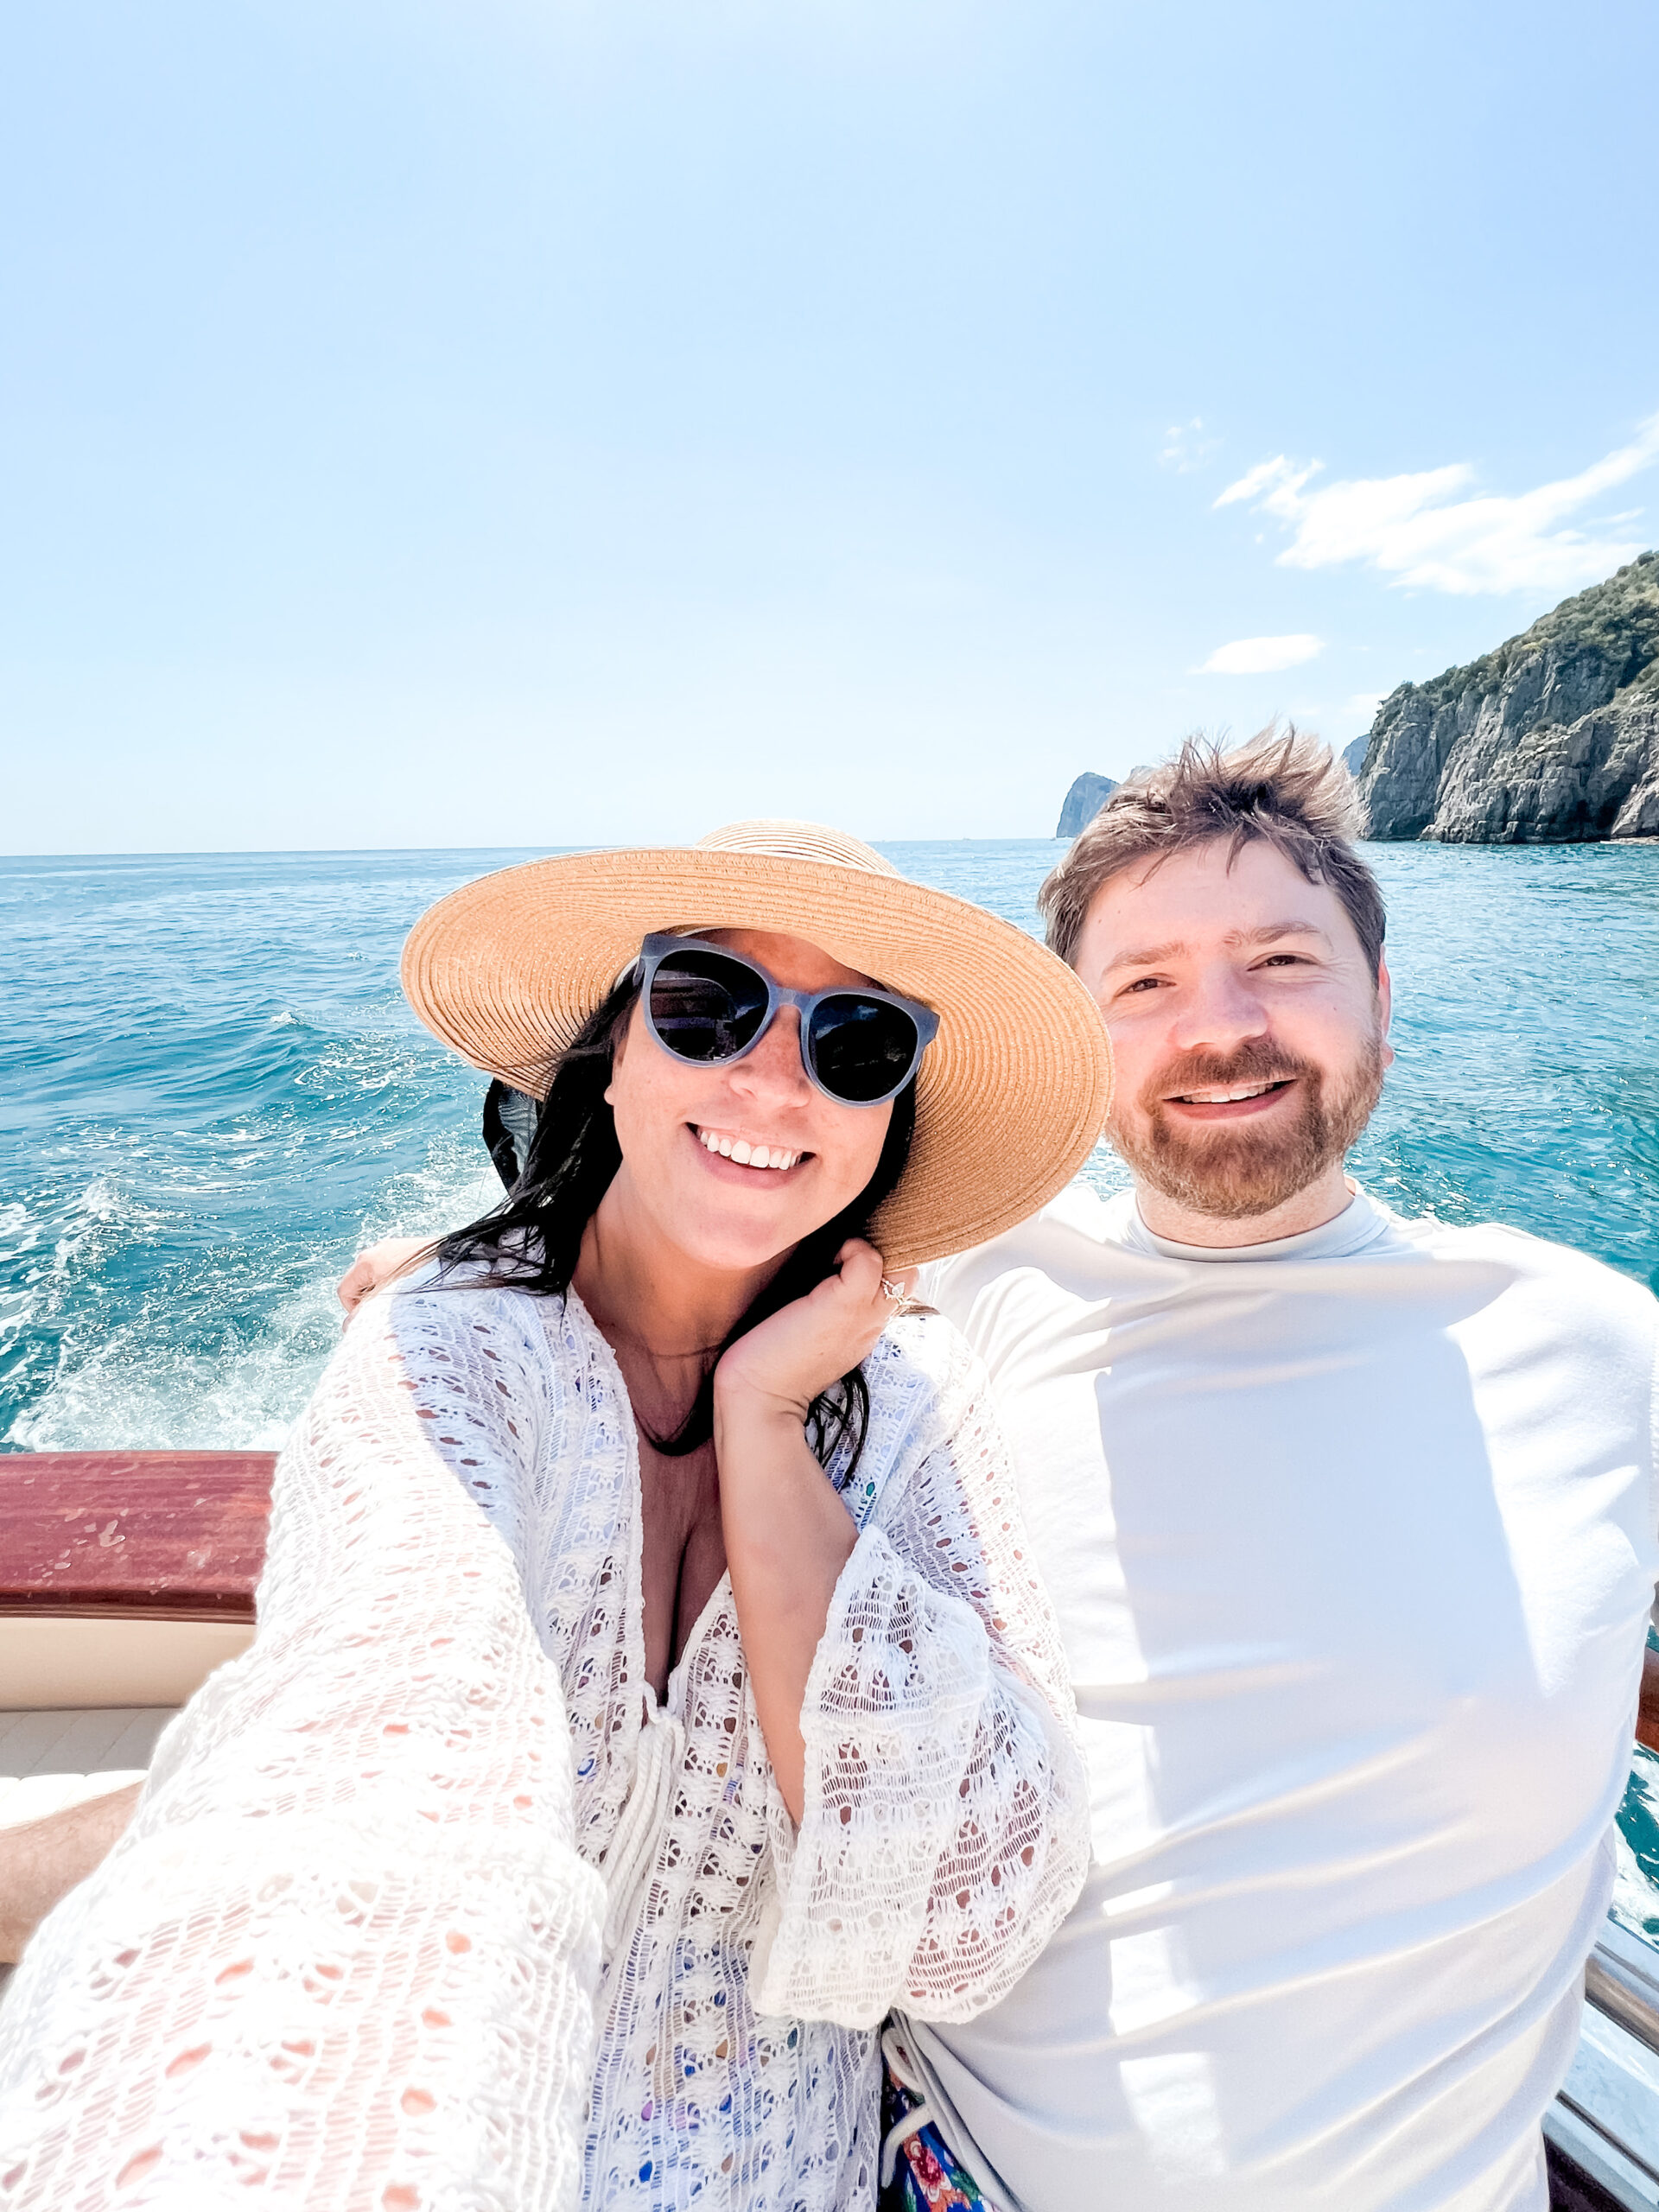 John and Brittney Naylor taking a selfie on their private boat tour of Capri from Positano, Italy